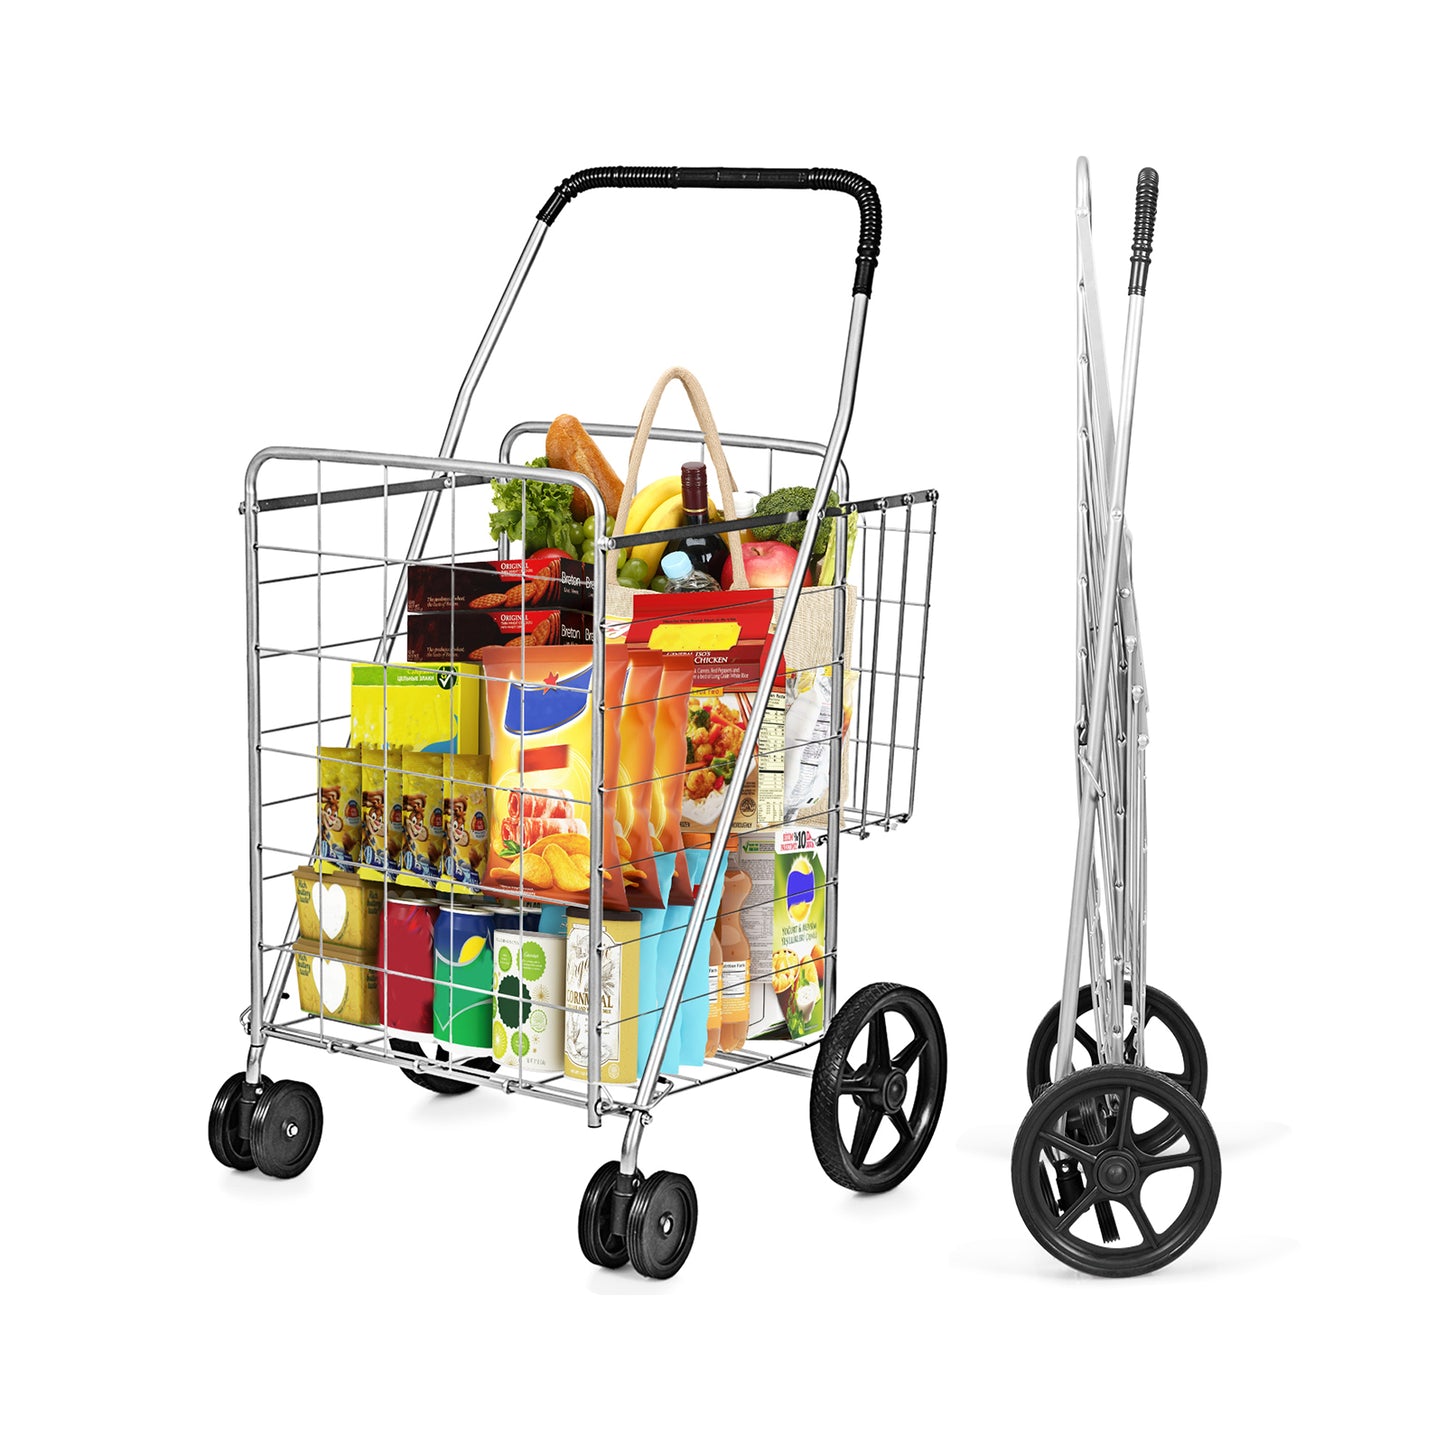 Folding Shopping Cart for Laundry with Swiveling Wheels and Dual Storage Baskets-Sliver